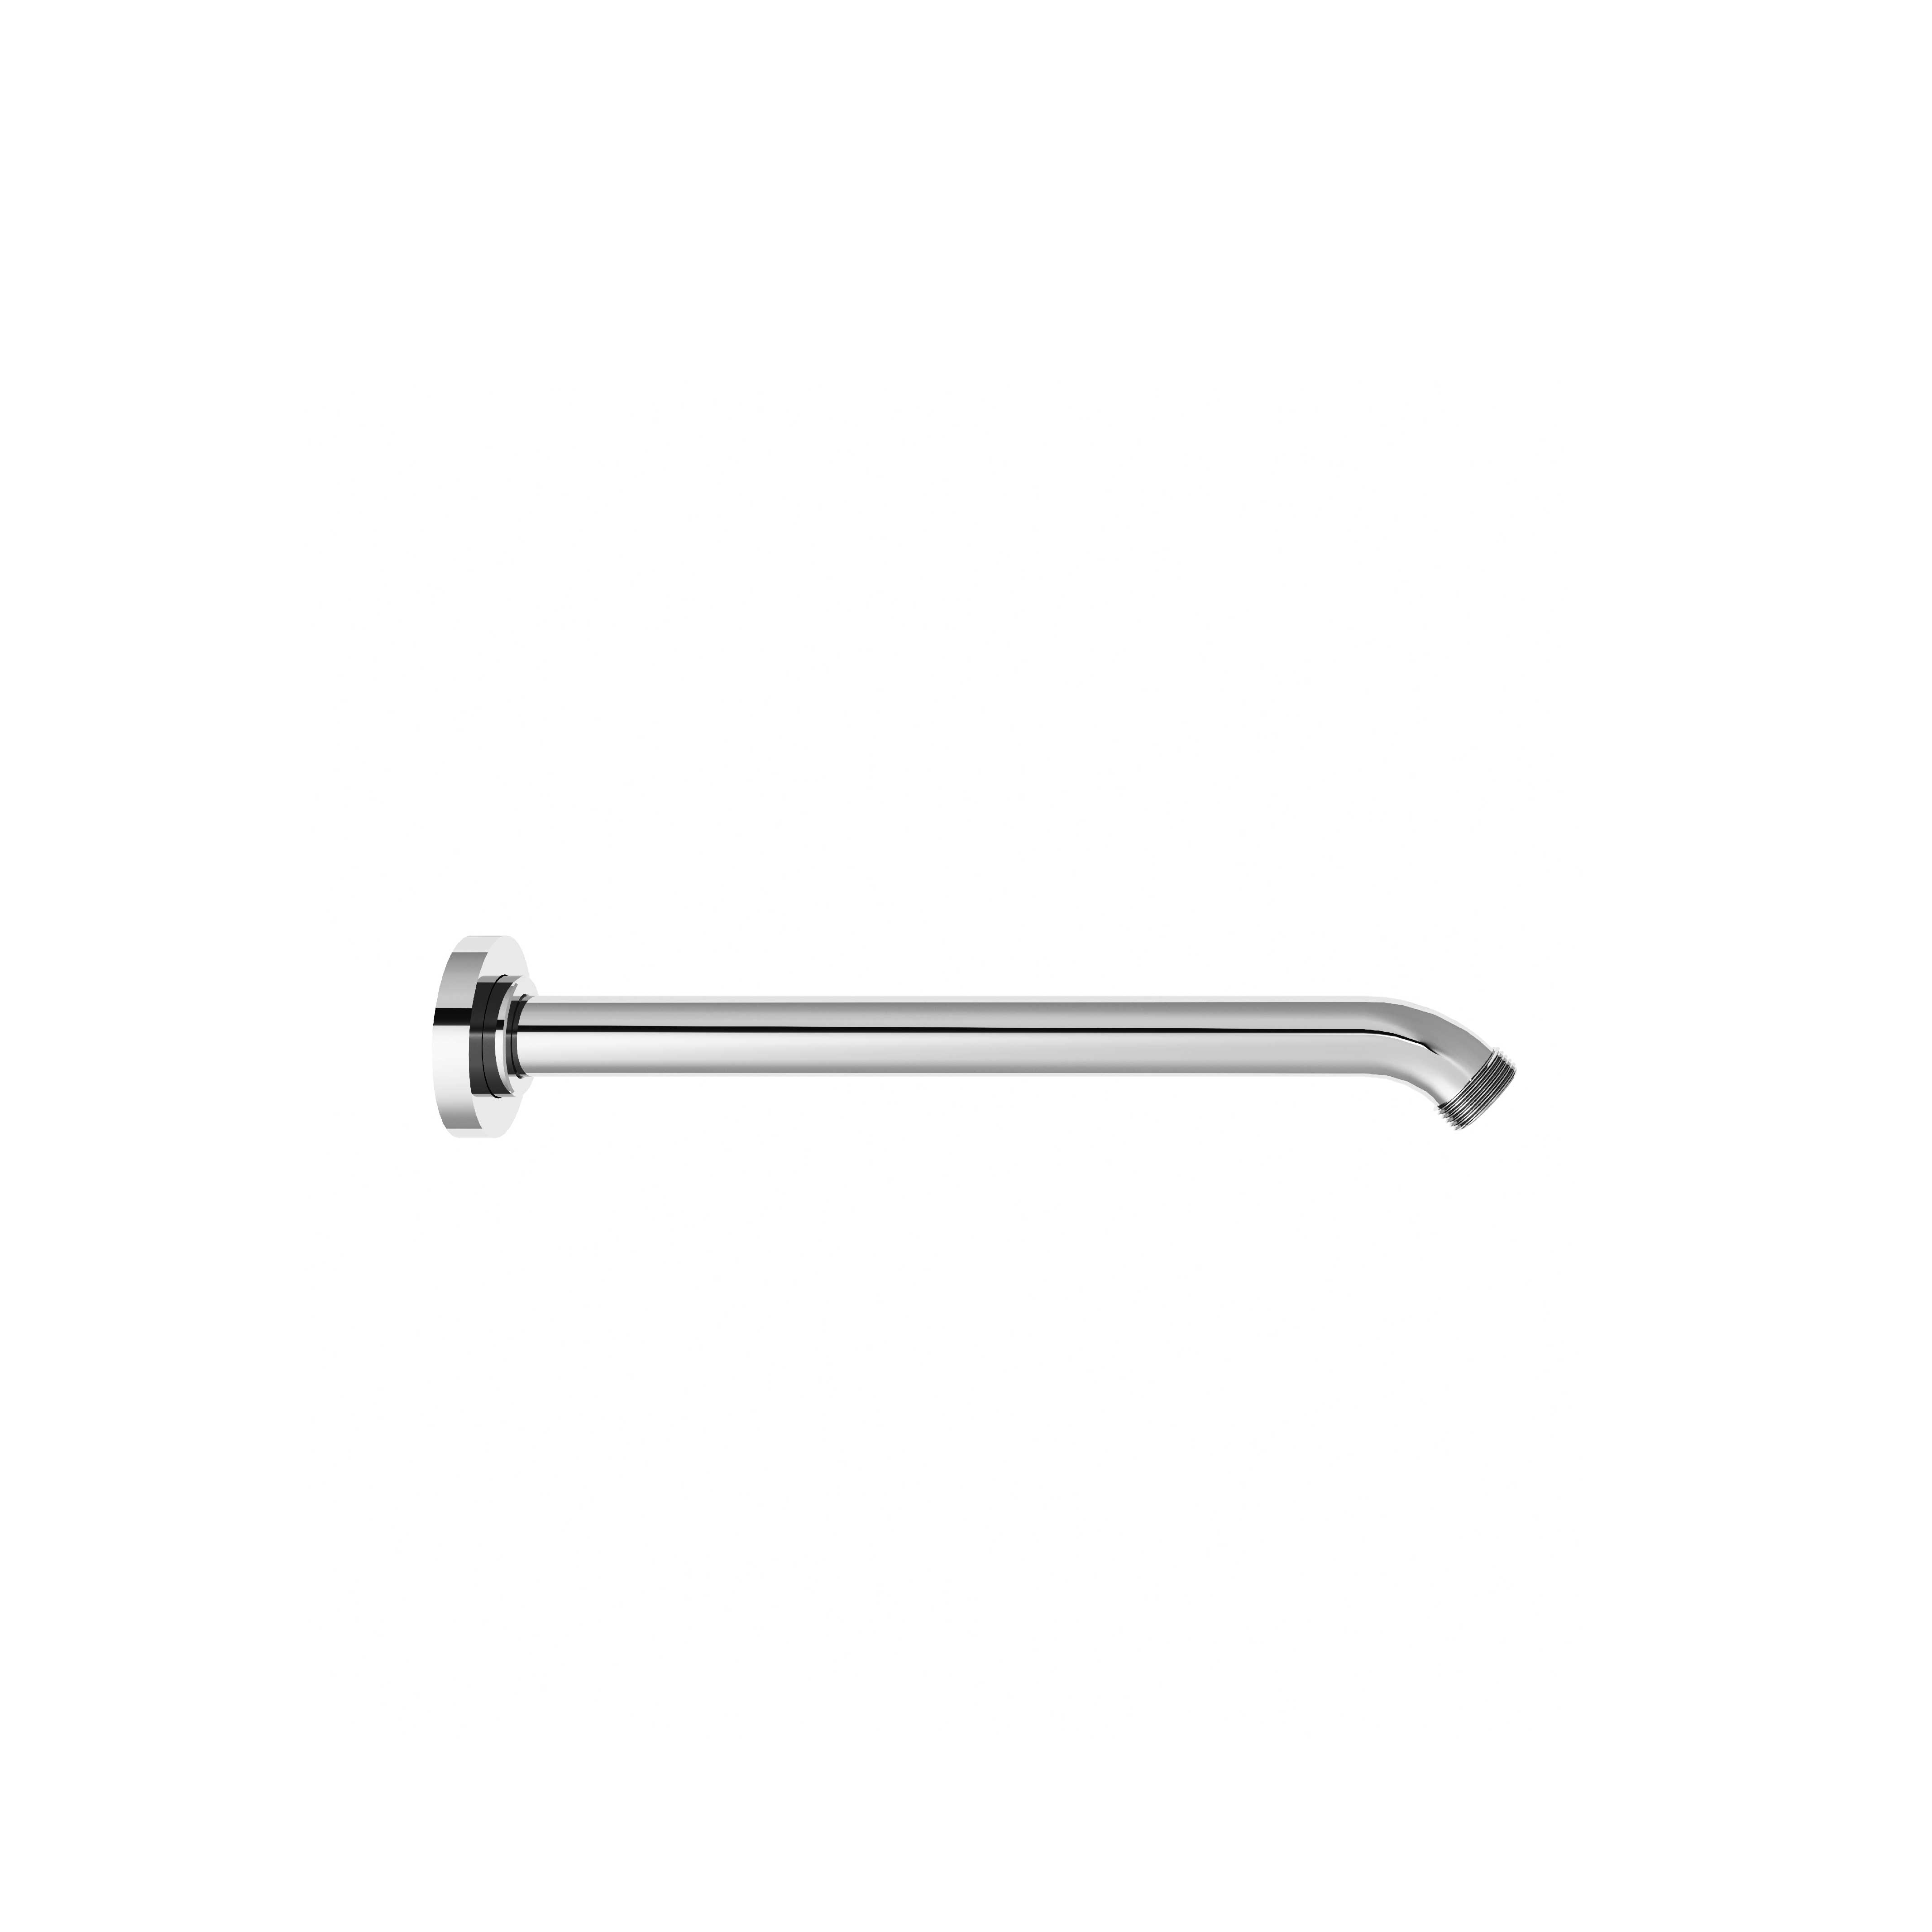 M91-2W170 Wall mounted shower arm 170mm